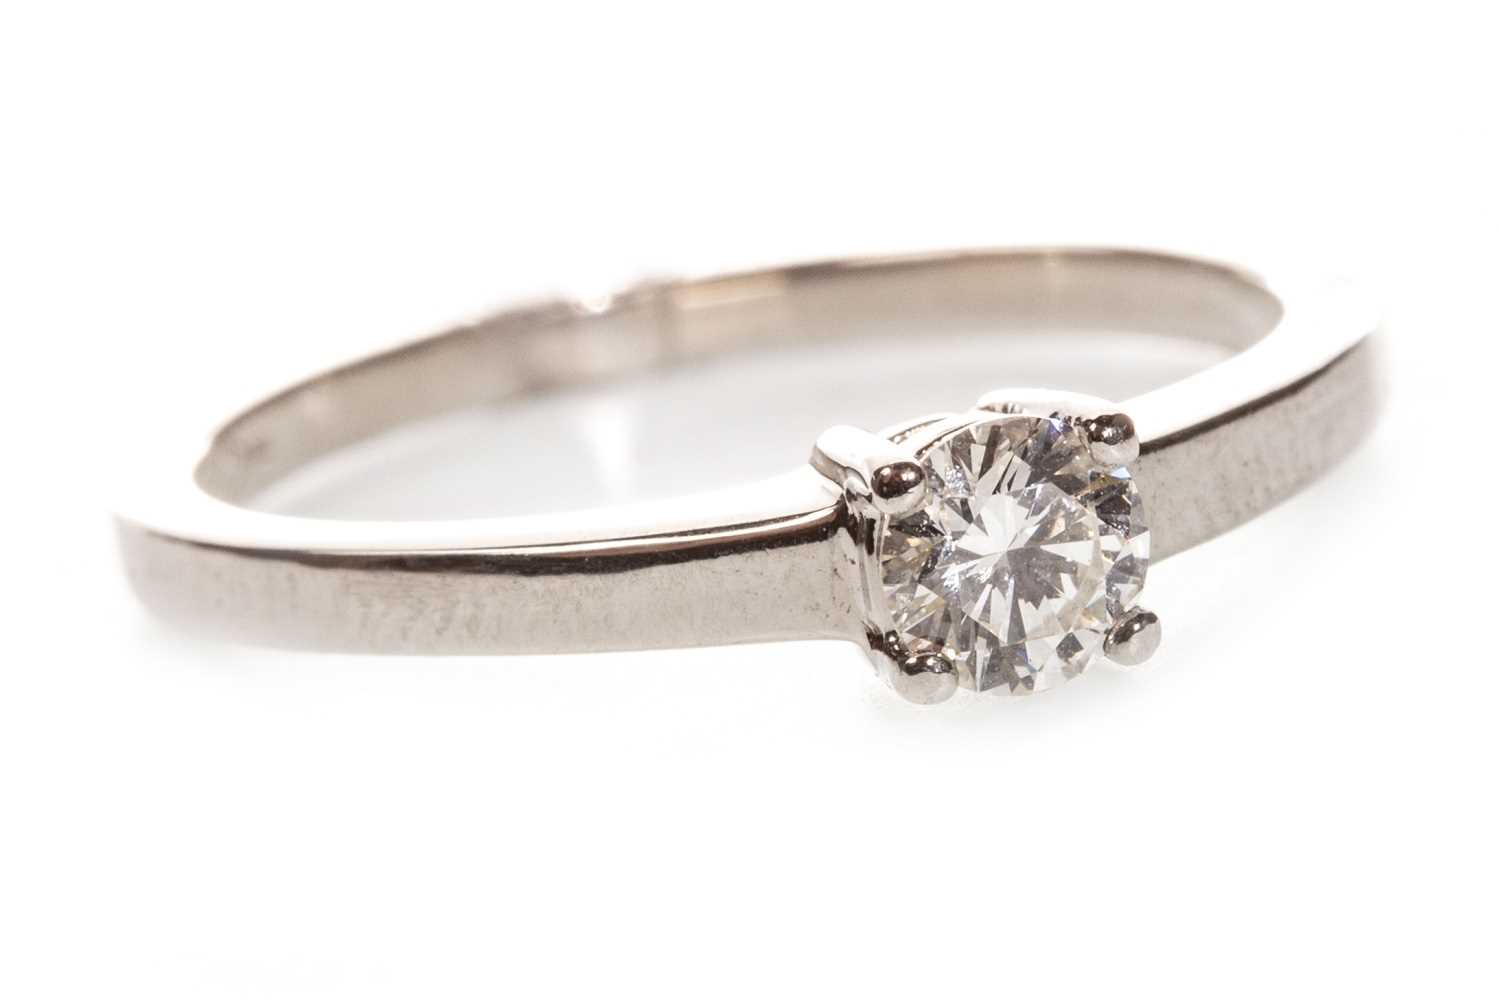 Lot 106 - A DIAMOND SOLITAIRE RING